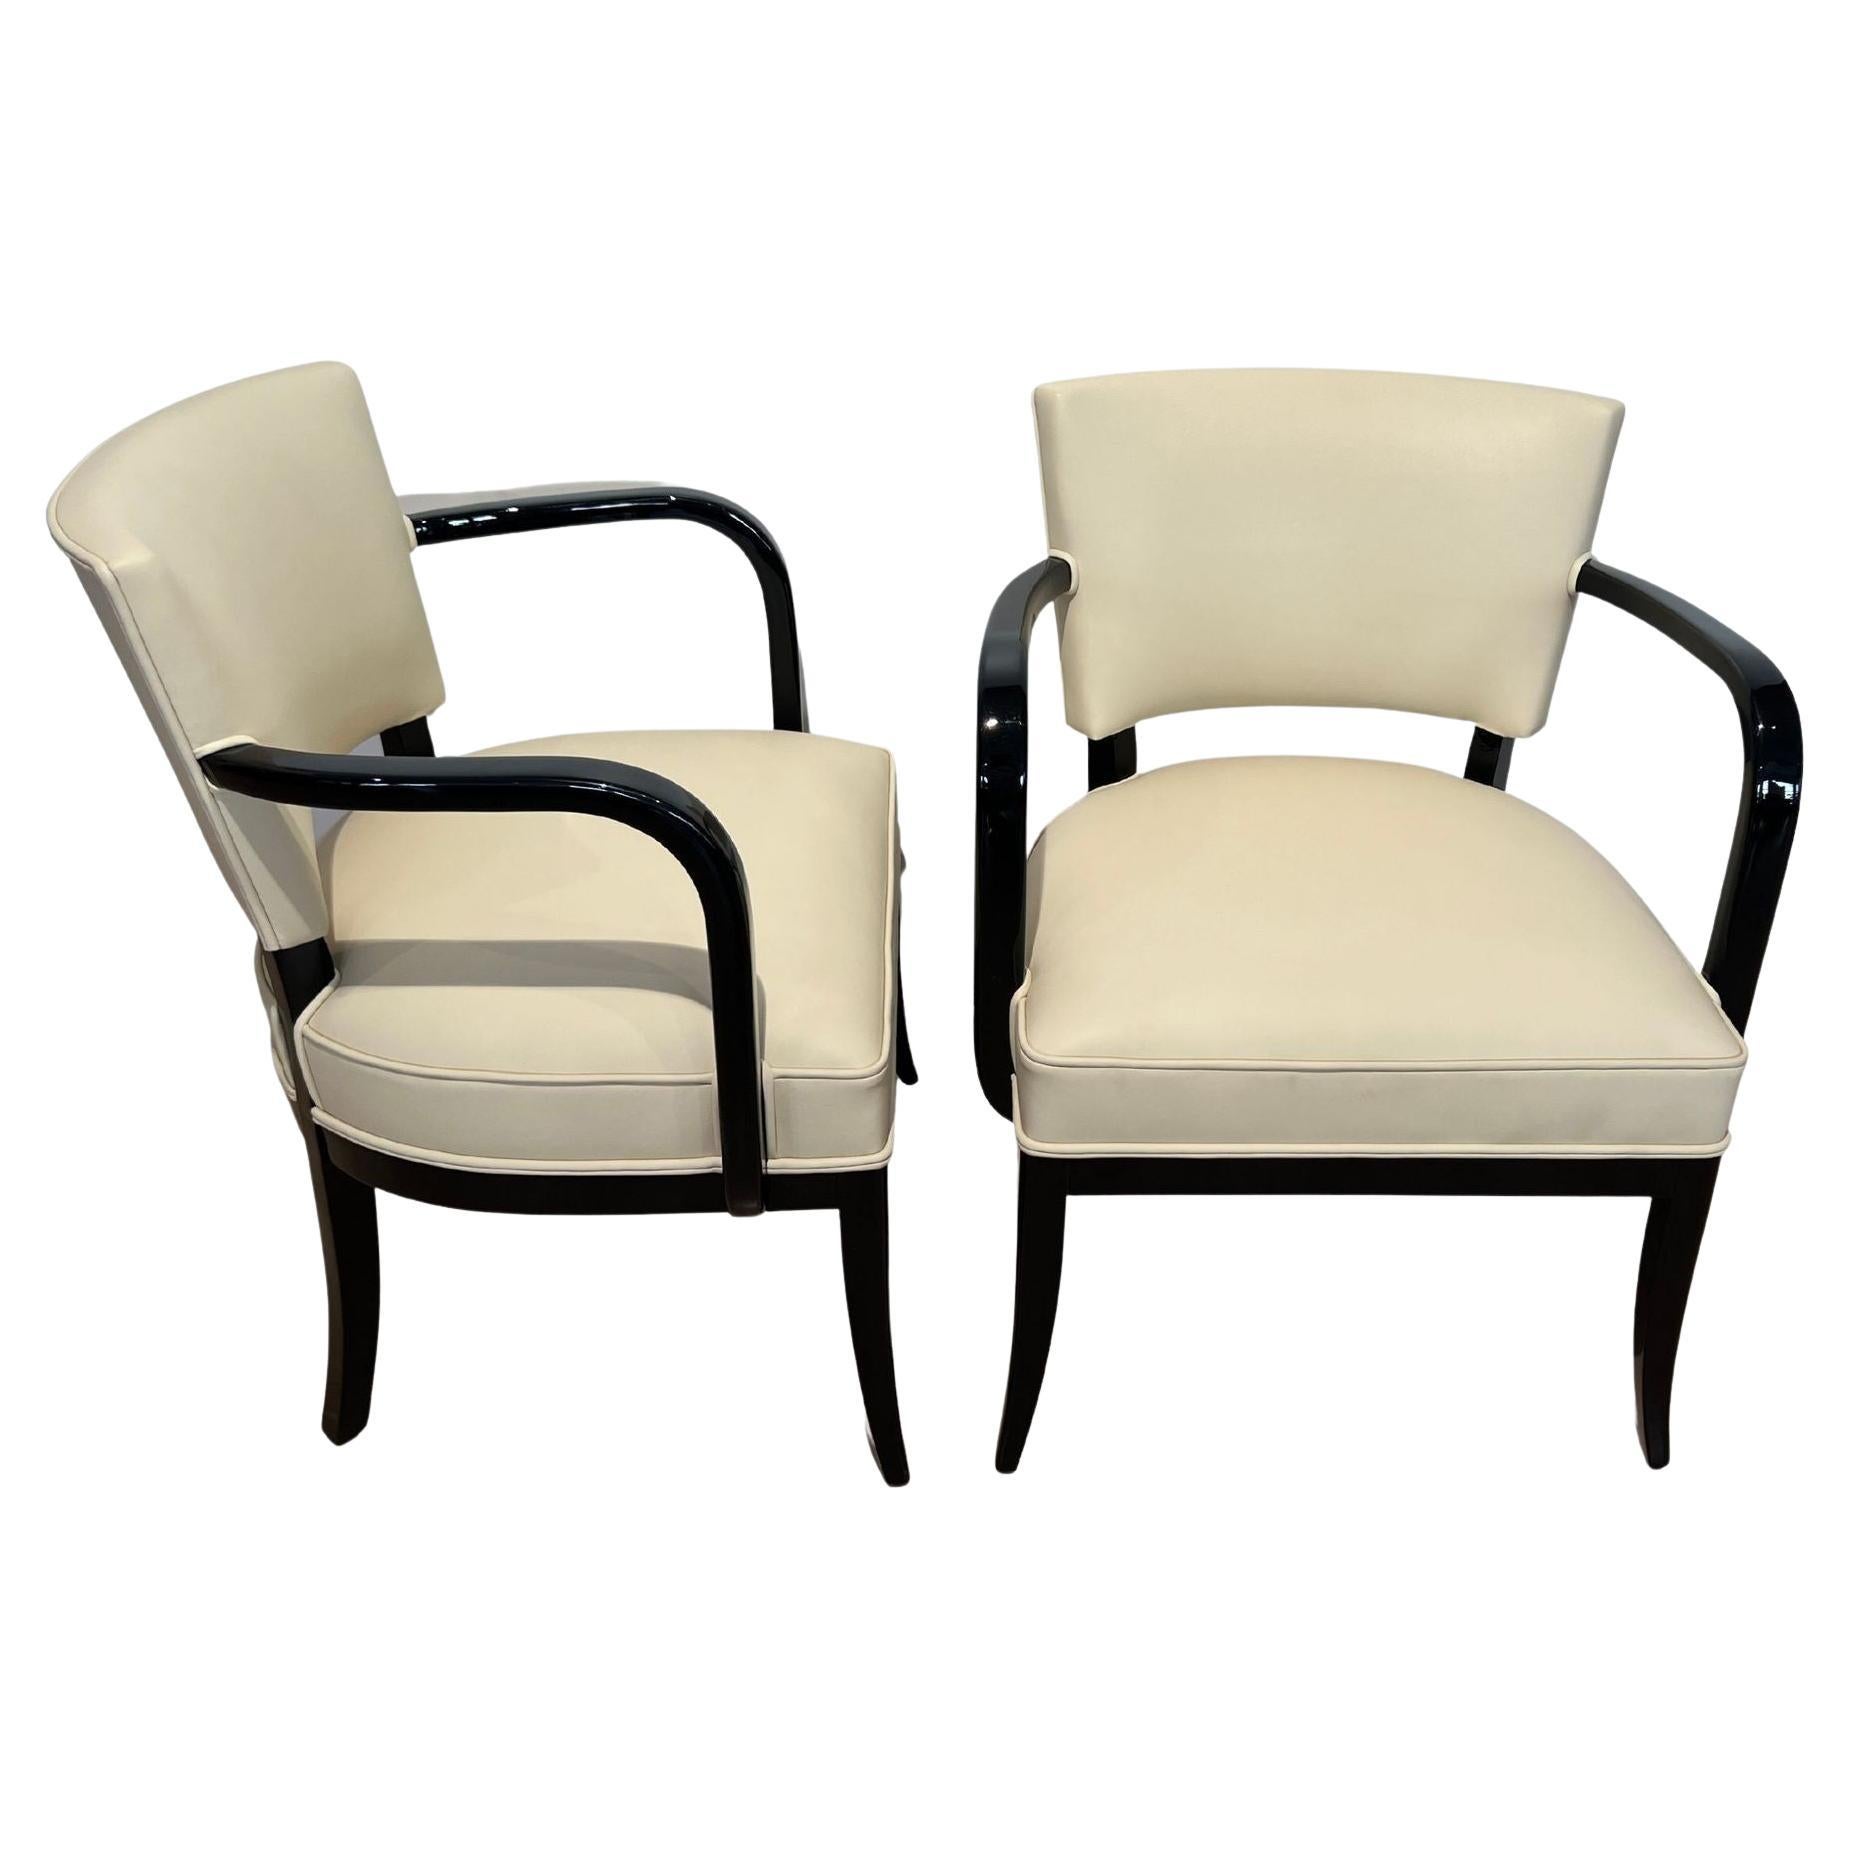 Pair of Art Deco Armchairs, Black Lacquer, Creme Leather, France, 1930s